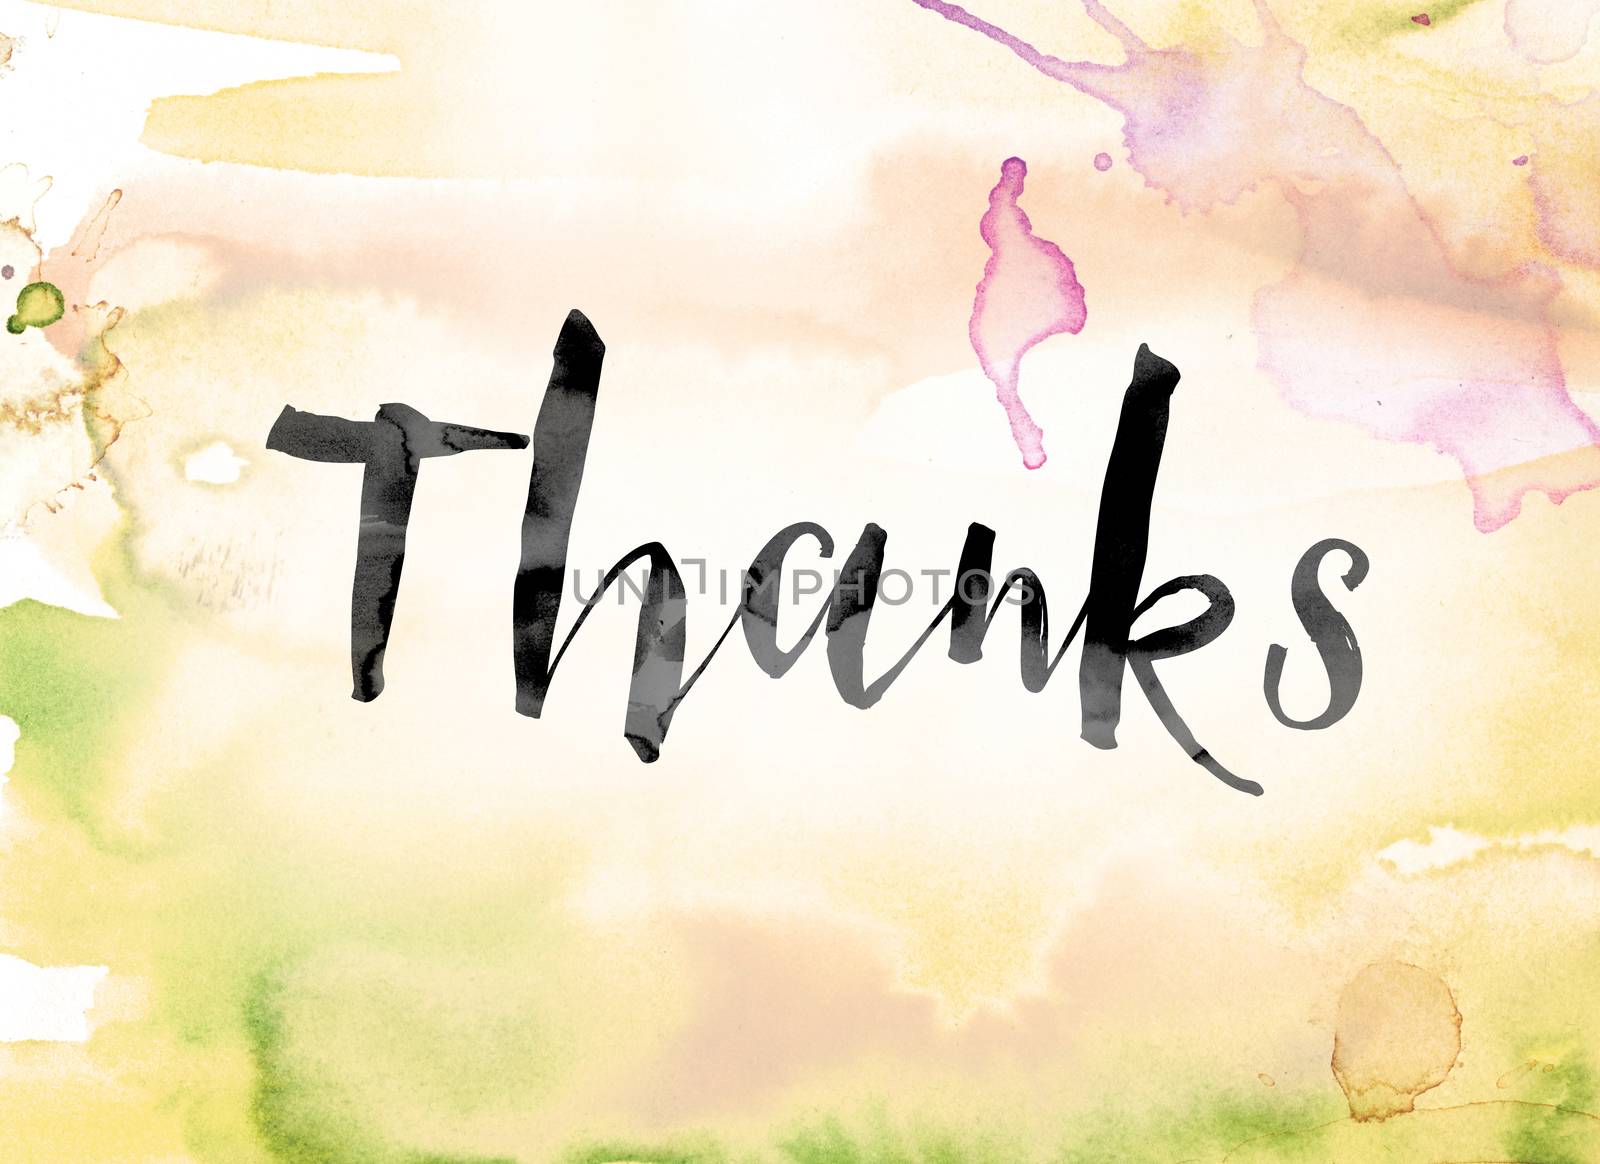 The word "Thanks" painted in black ink over a colorful watercolor washed background concept and theme.